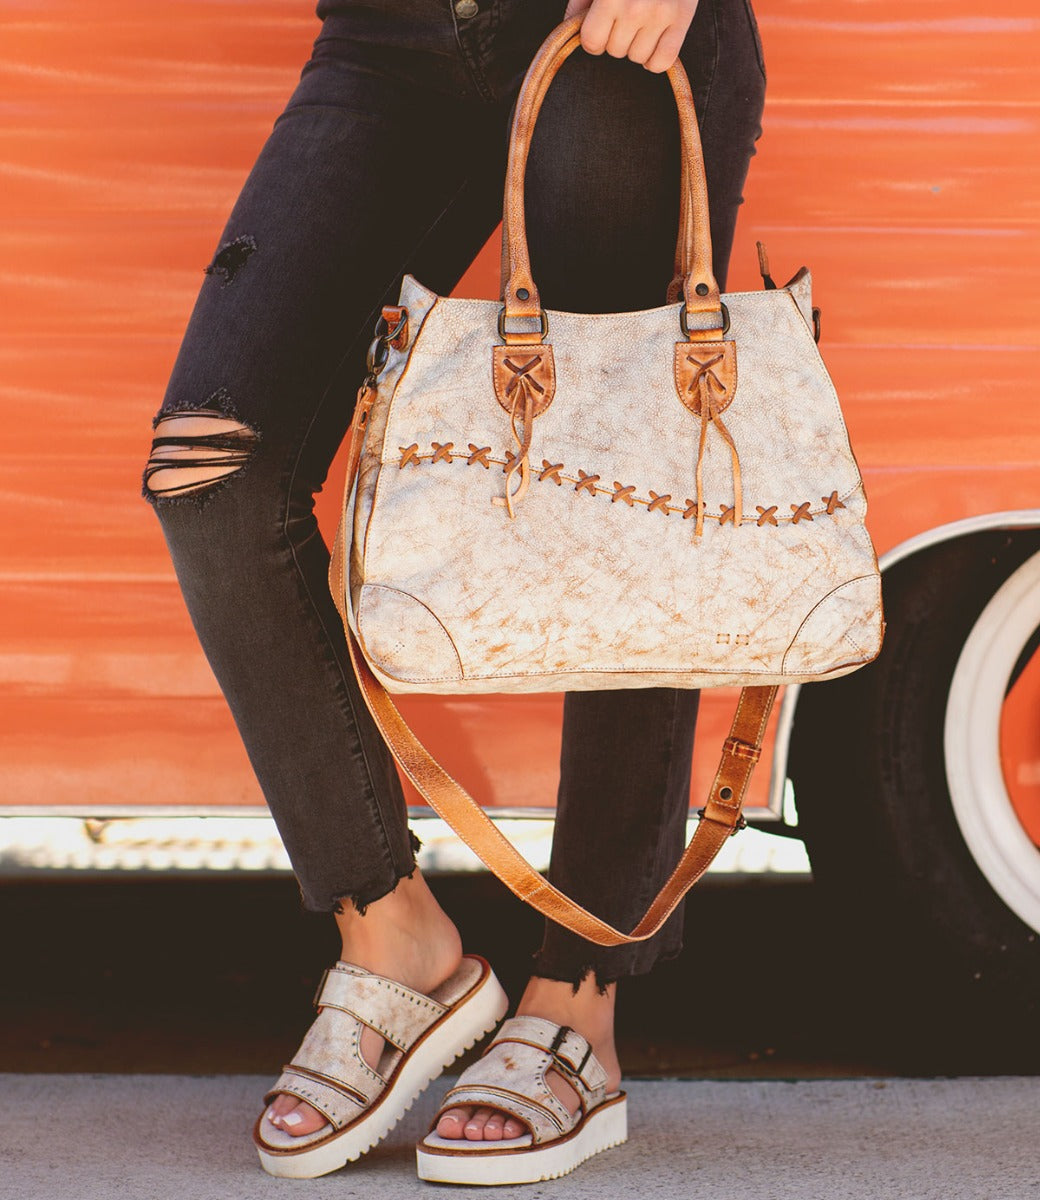 A woman carrying a white and tan Bed Stu Bruna leather bag.